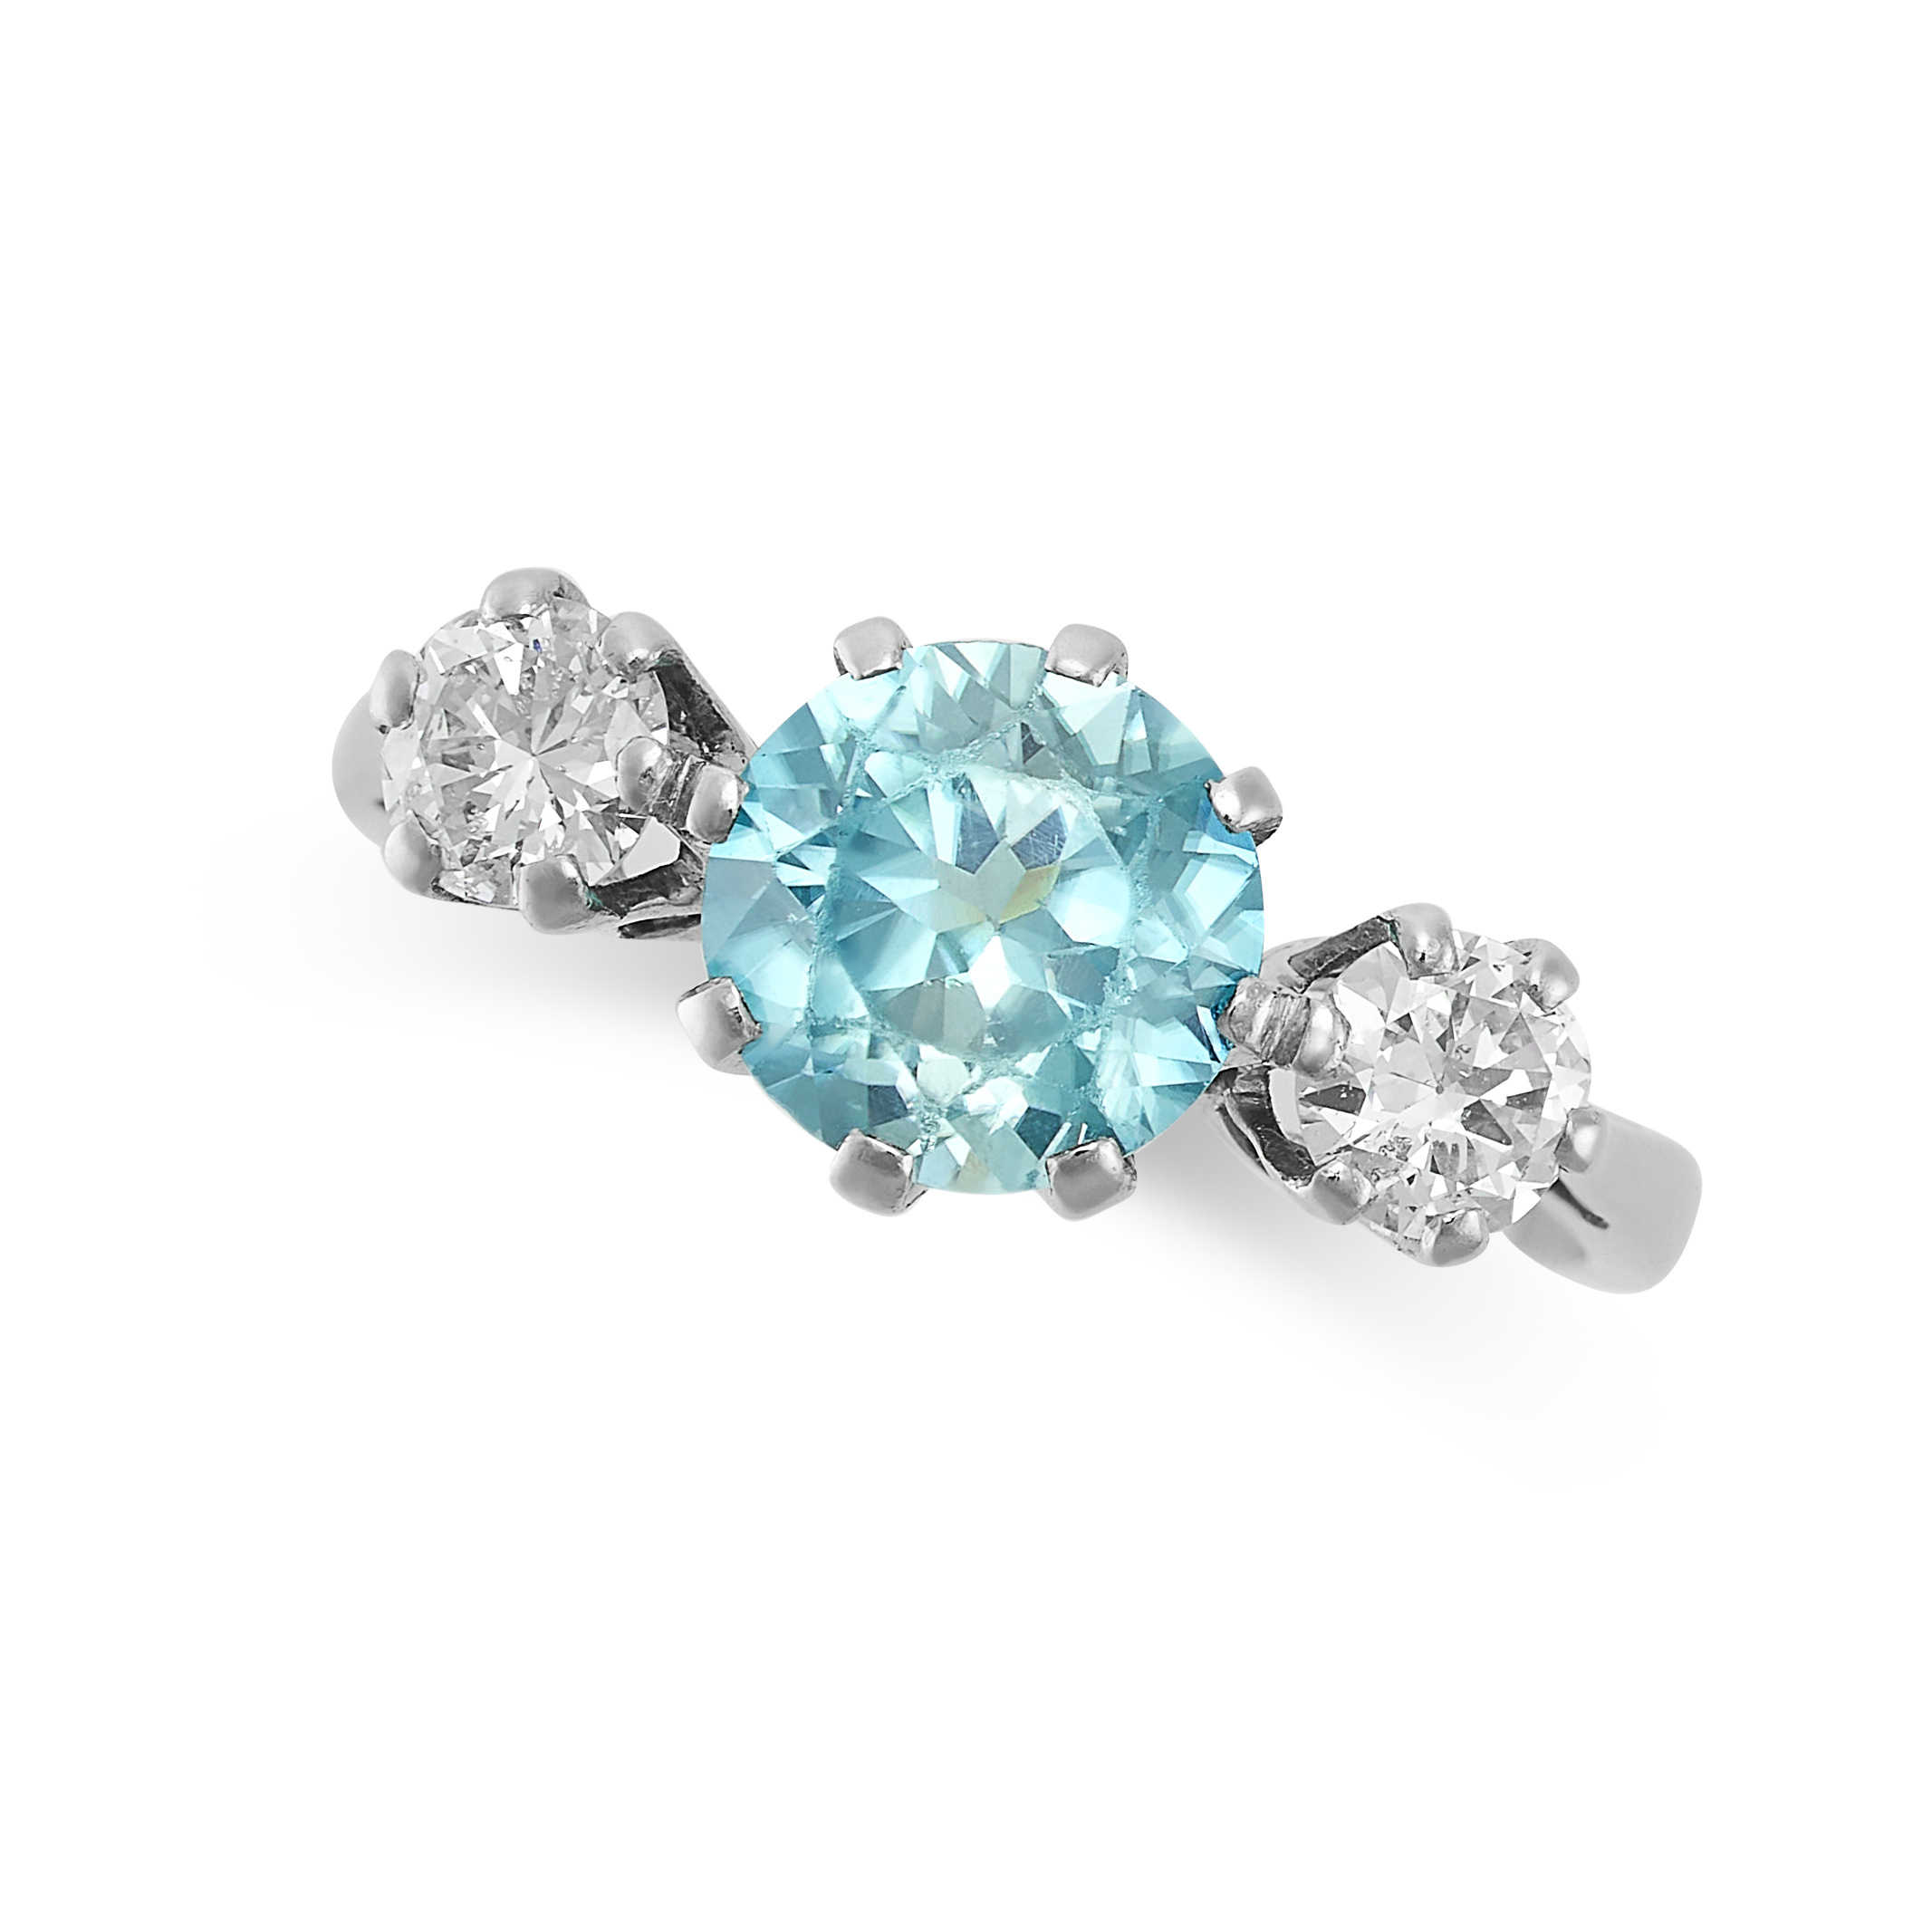 A BLUE ZIRCON AND DIAMOND THREE STONE RING set with a round cut blue zircon between two round cut